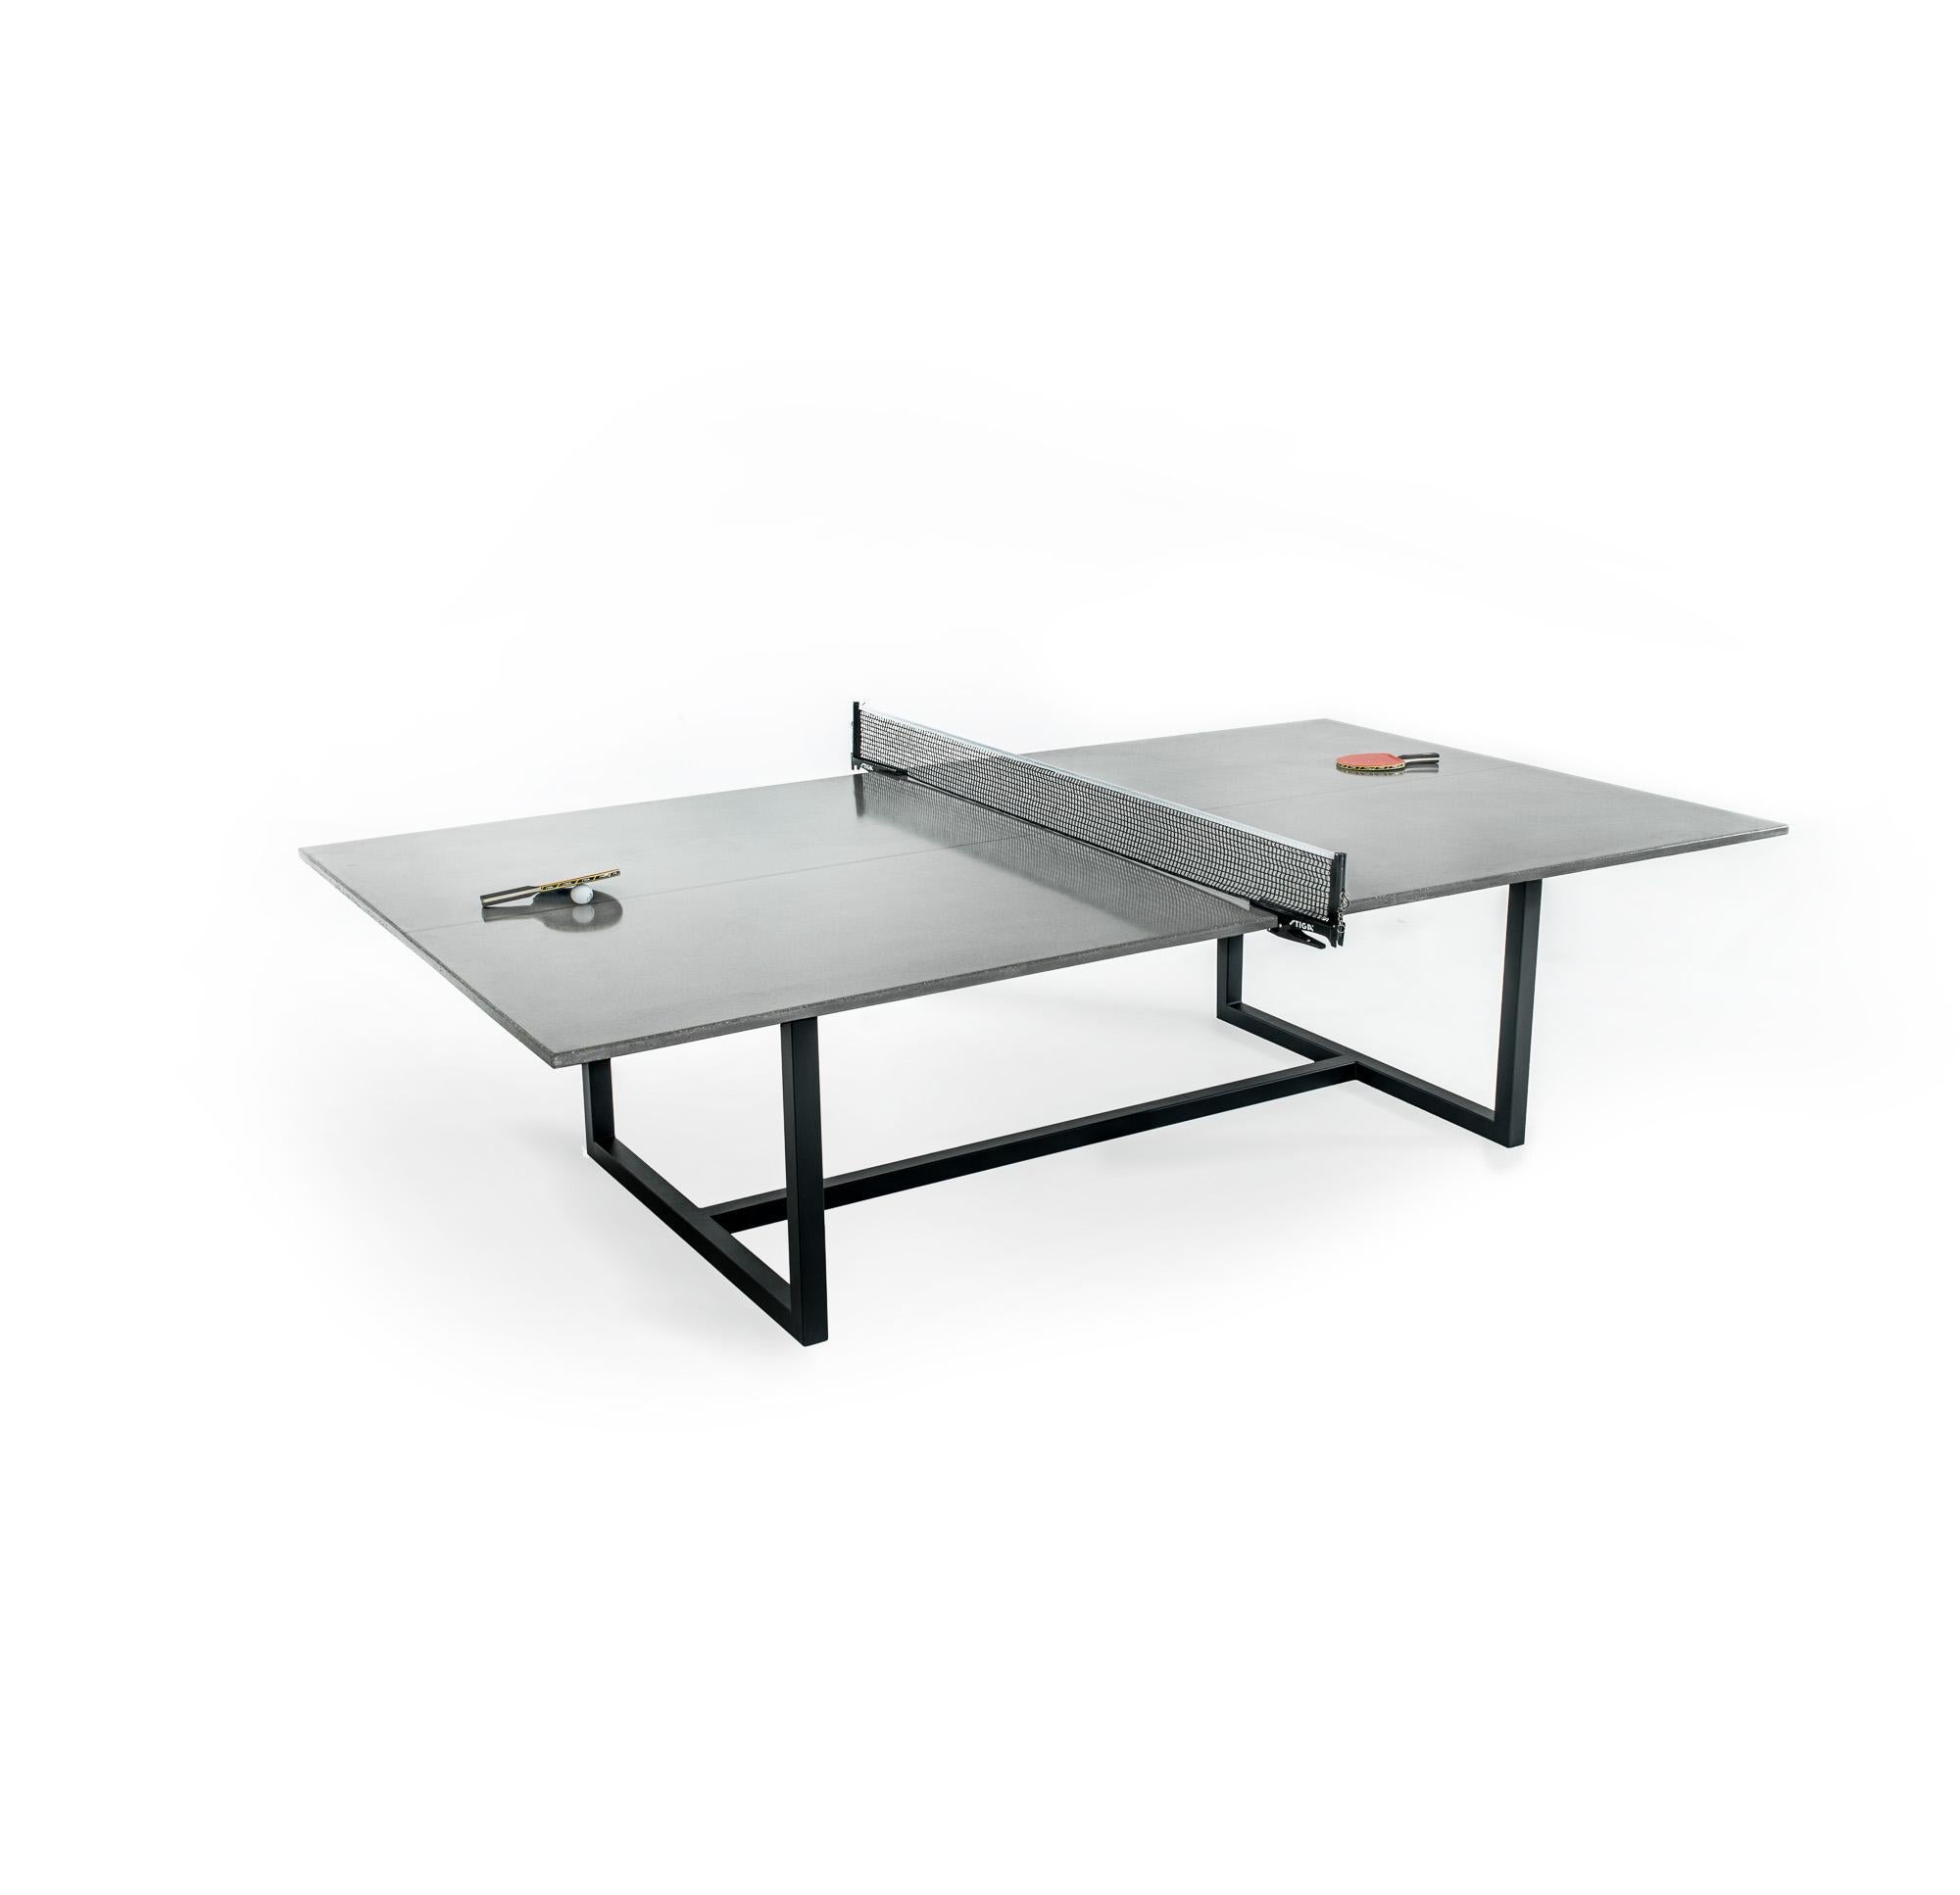 Contemporary concrete ping pong table with carbon fiber reinforcement and powder coated steel base. Regulation size with acid stained center line; doubles as a dining table. Comes with removable net. Suitable for indoor and outdoor use. Compliment